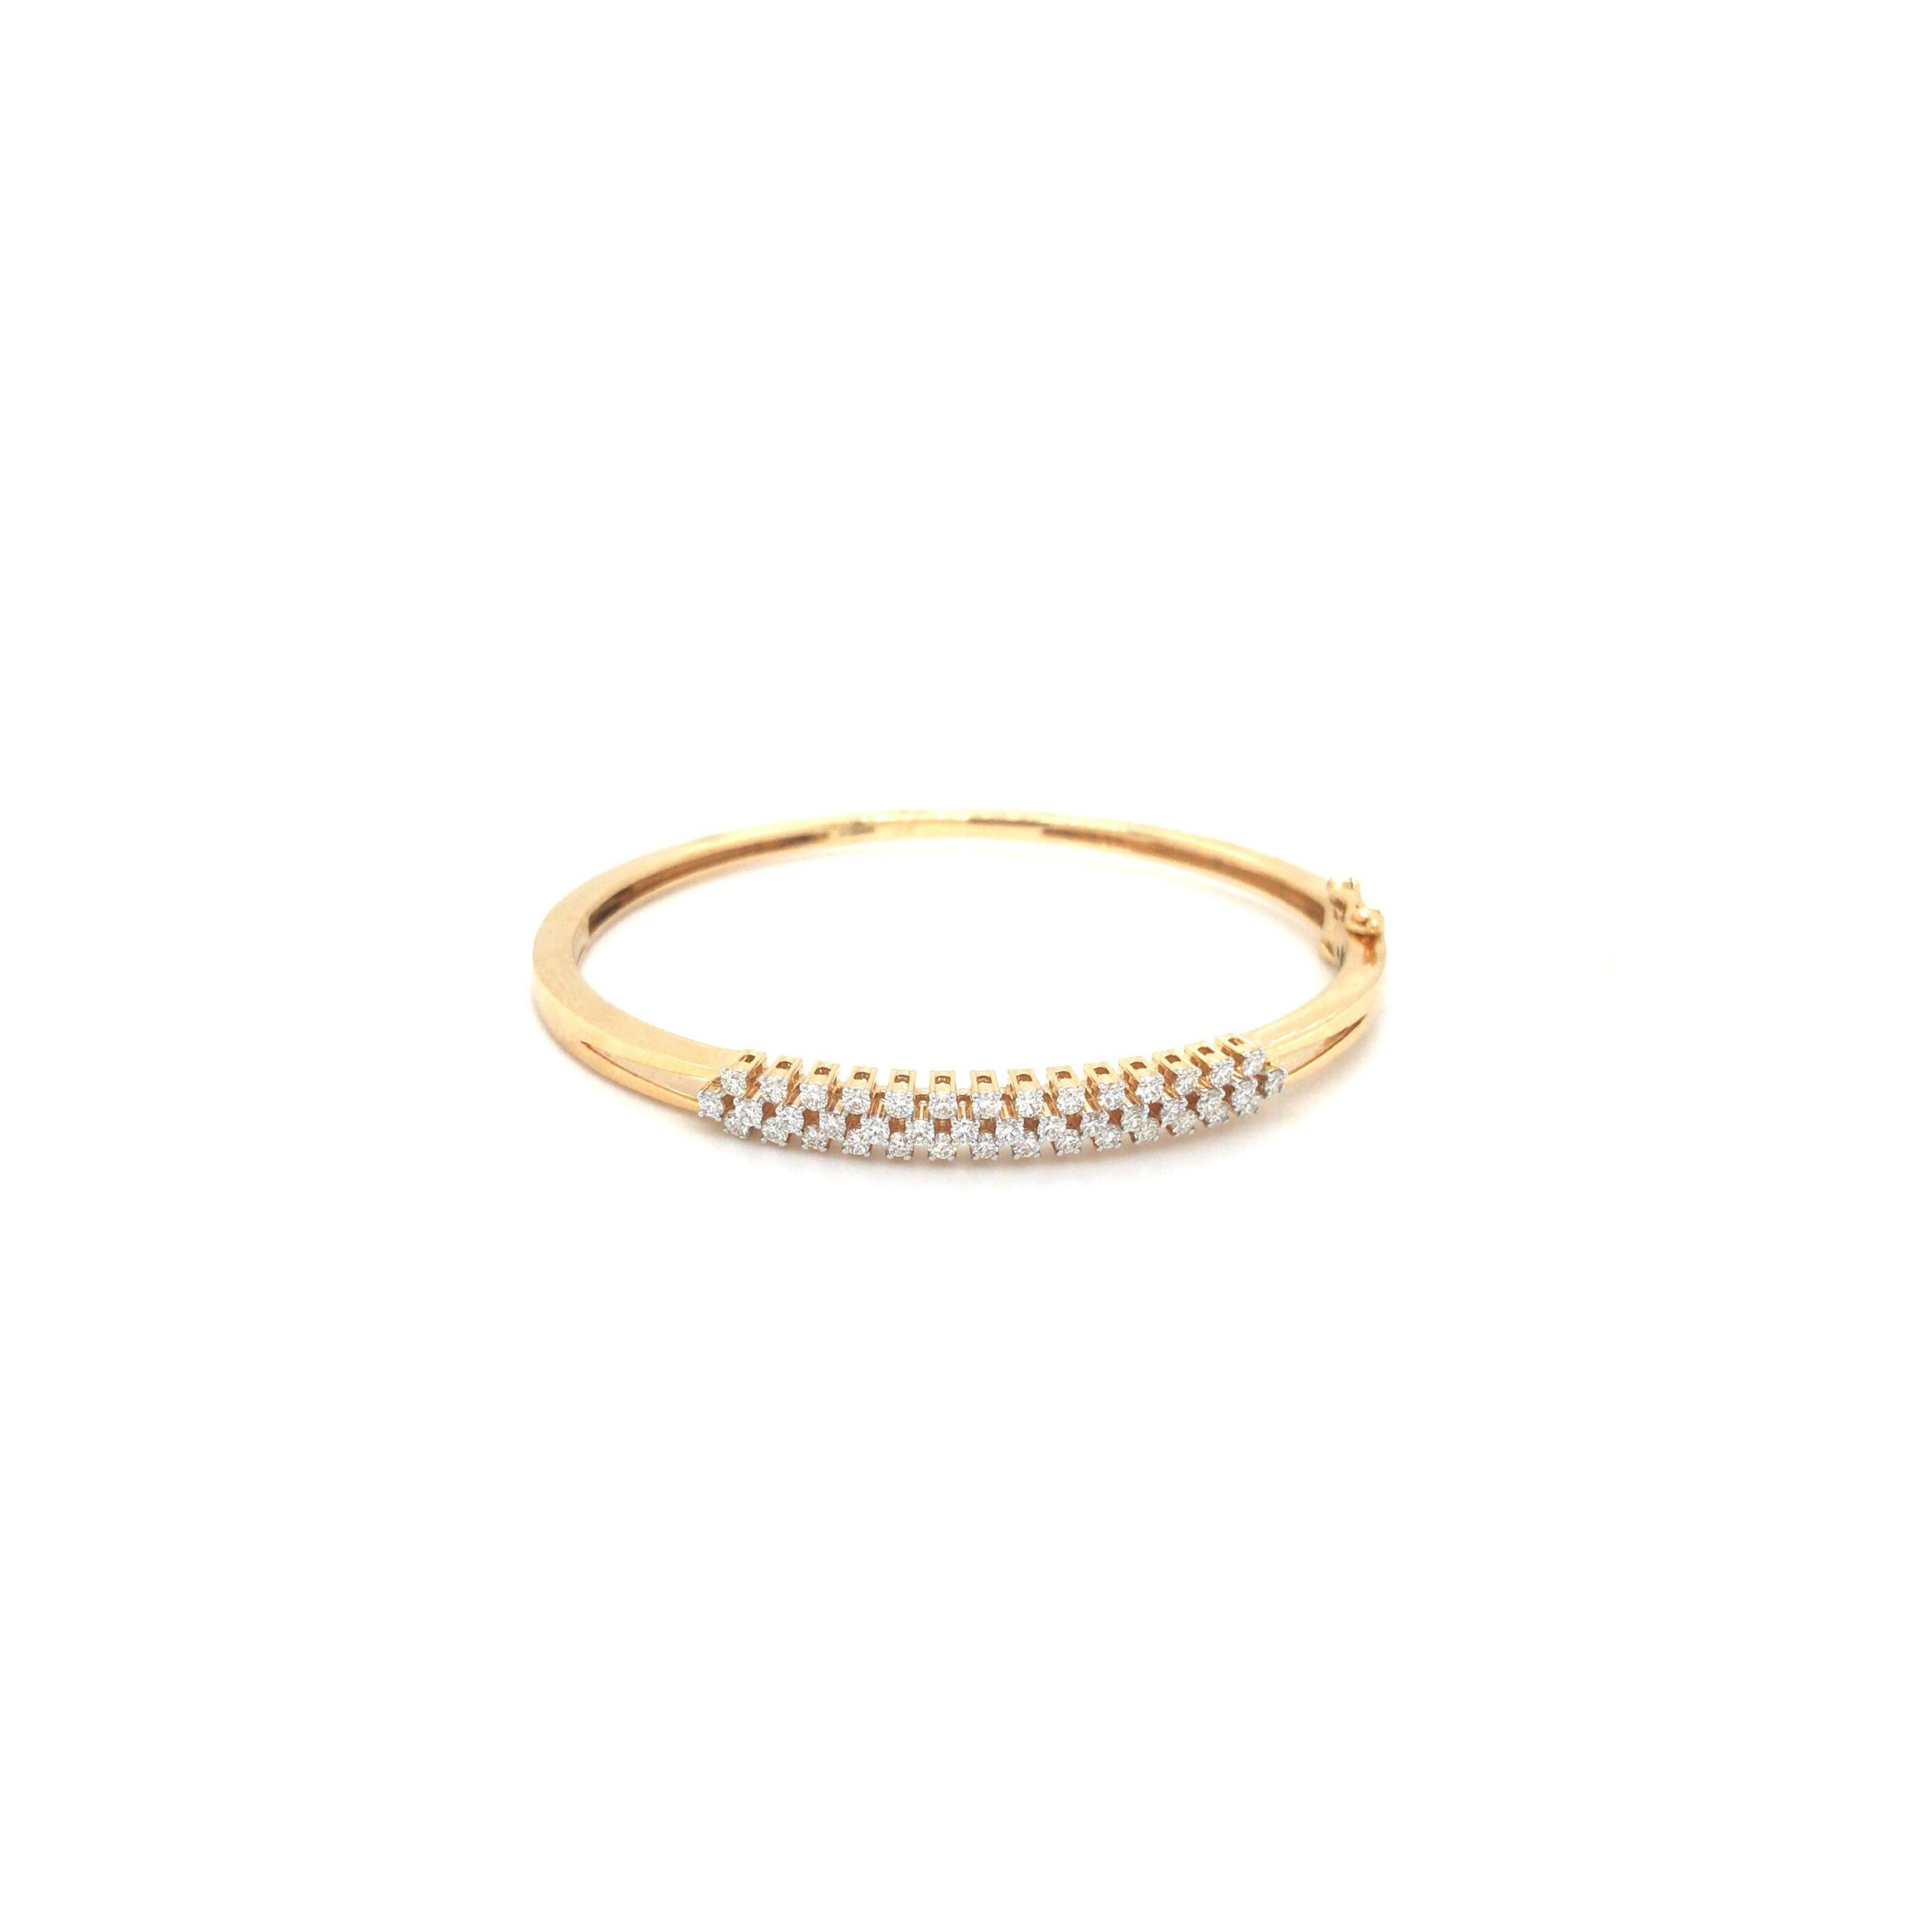 Always My Daughter 18K Gold-Plated Bracelet Featuring An Open Bangle Design  With 2 Sculpted Hearts